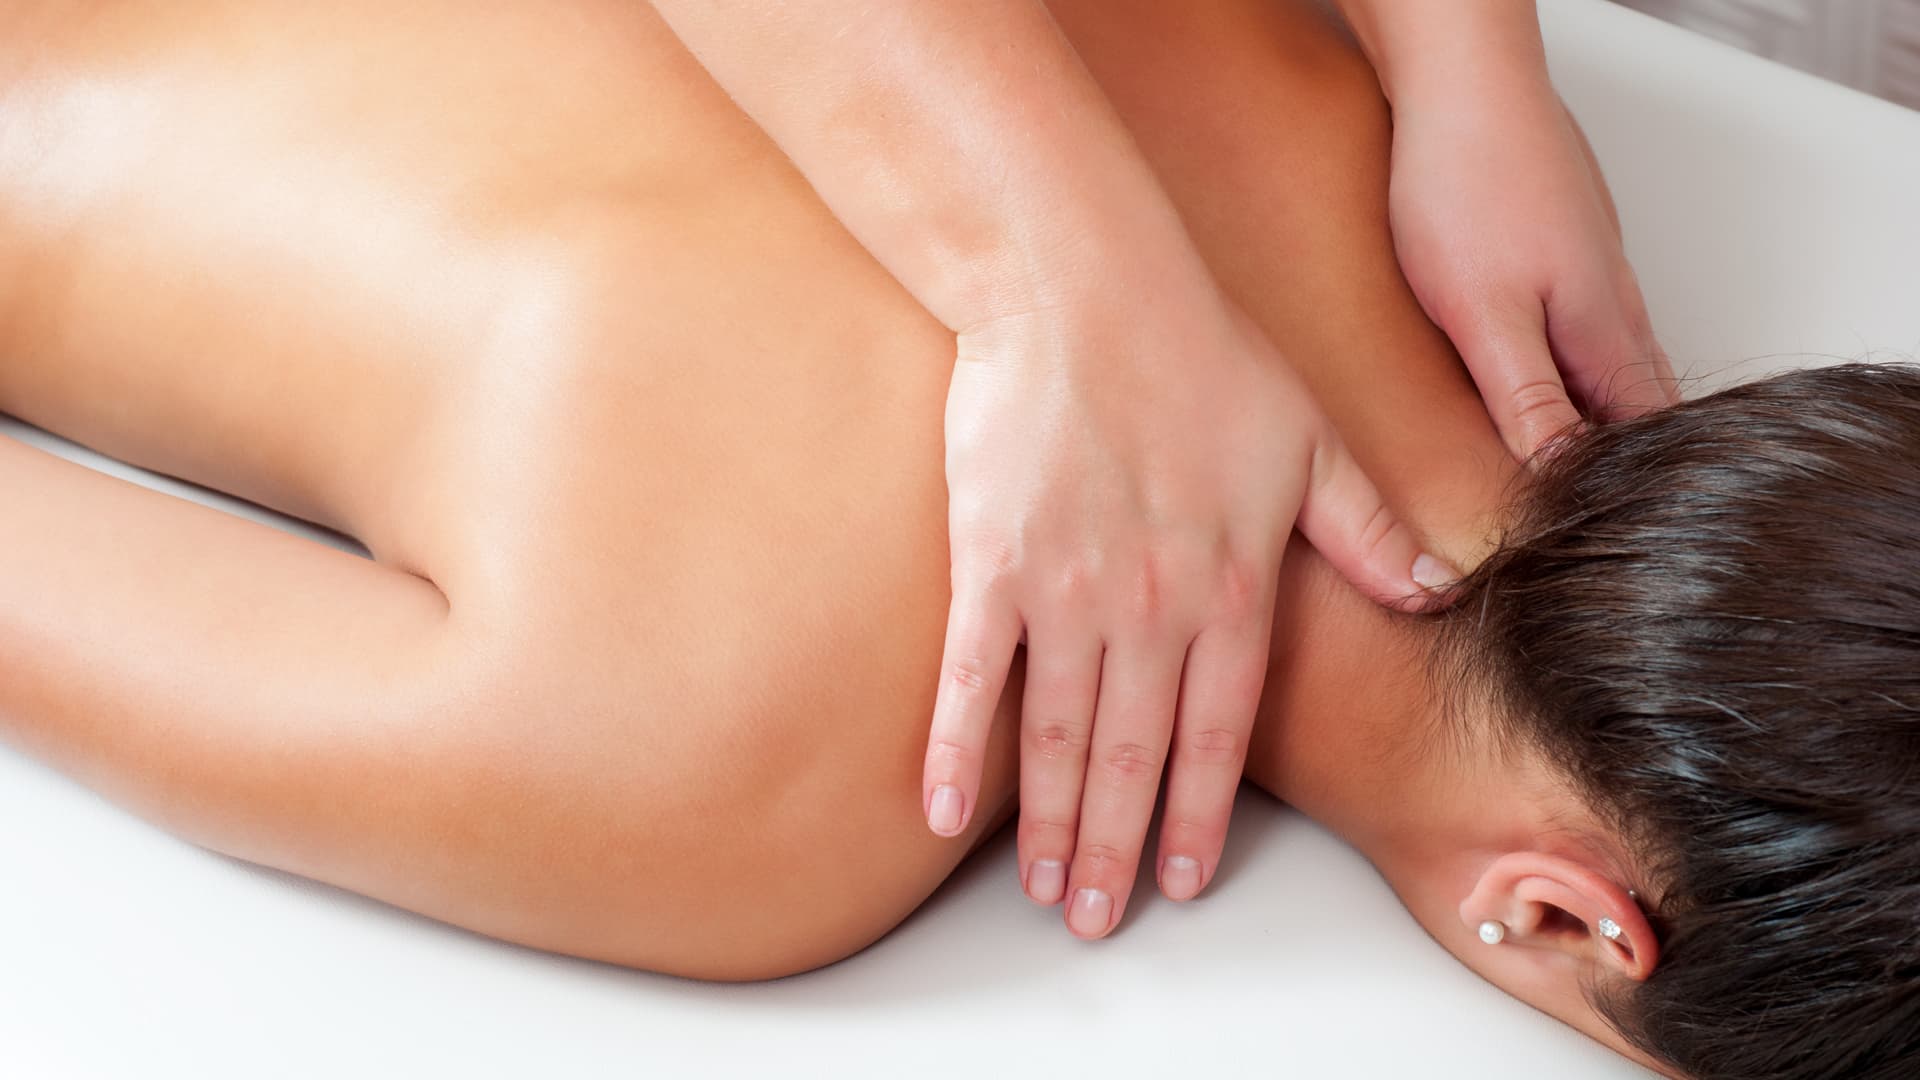 picture of a woman getting a back massage.